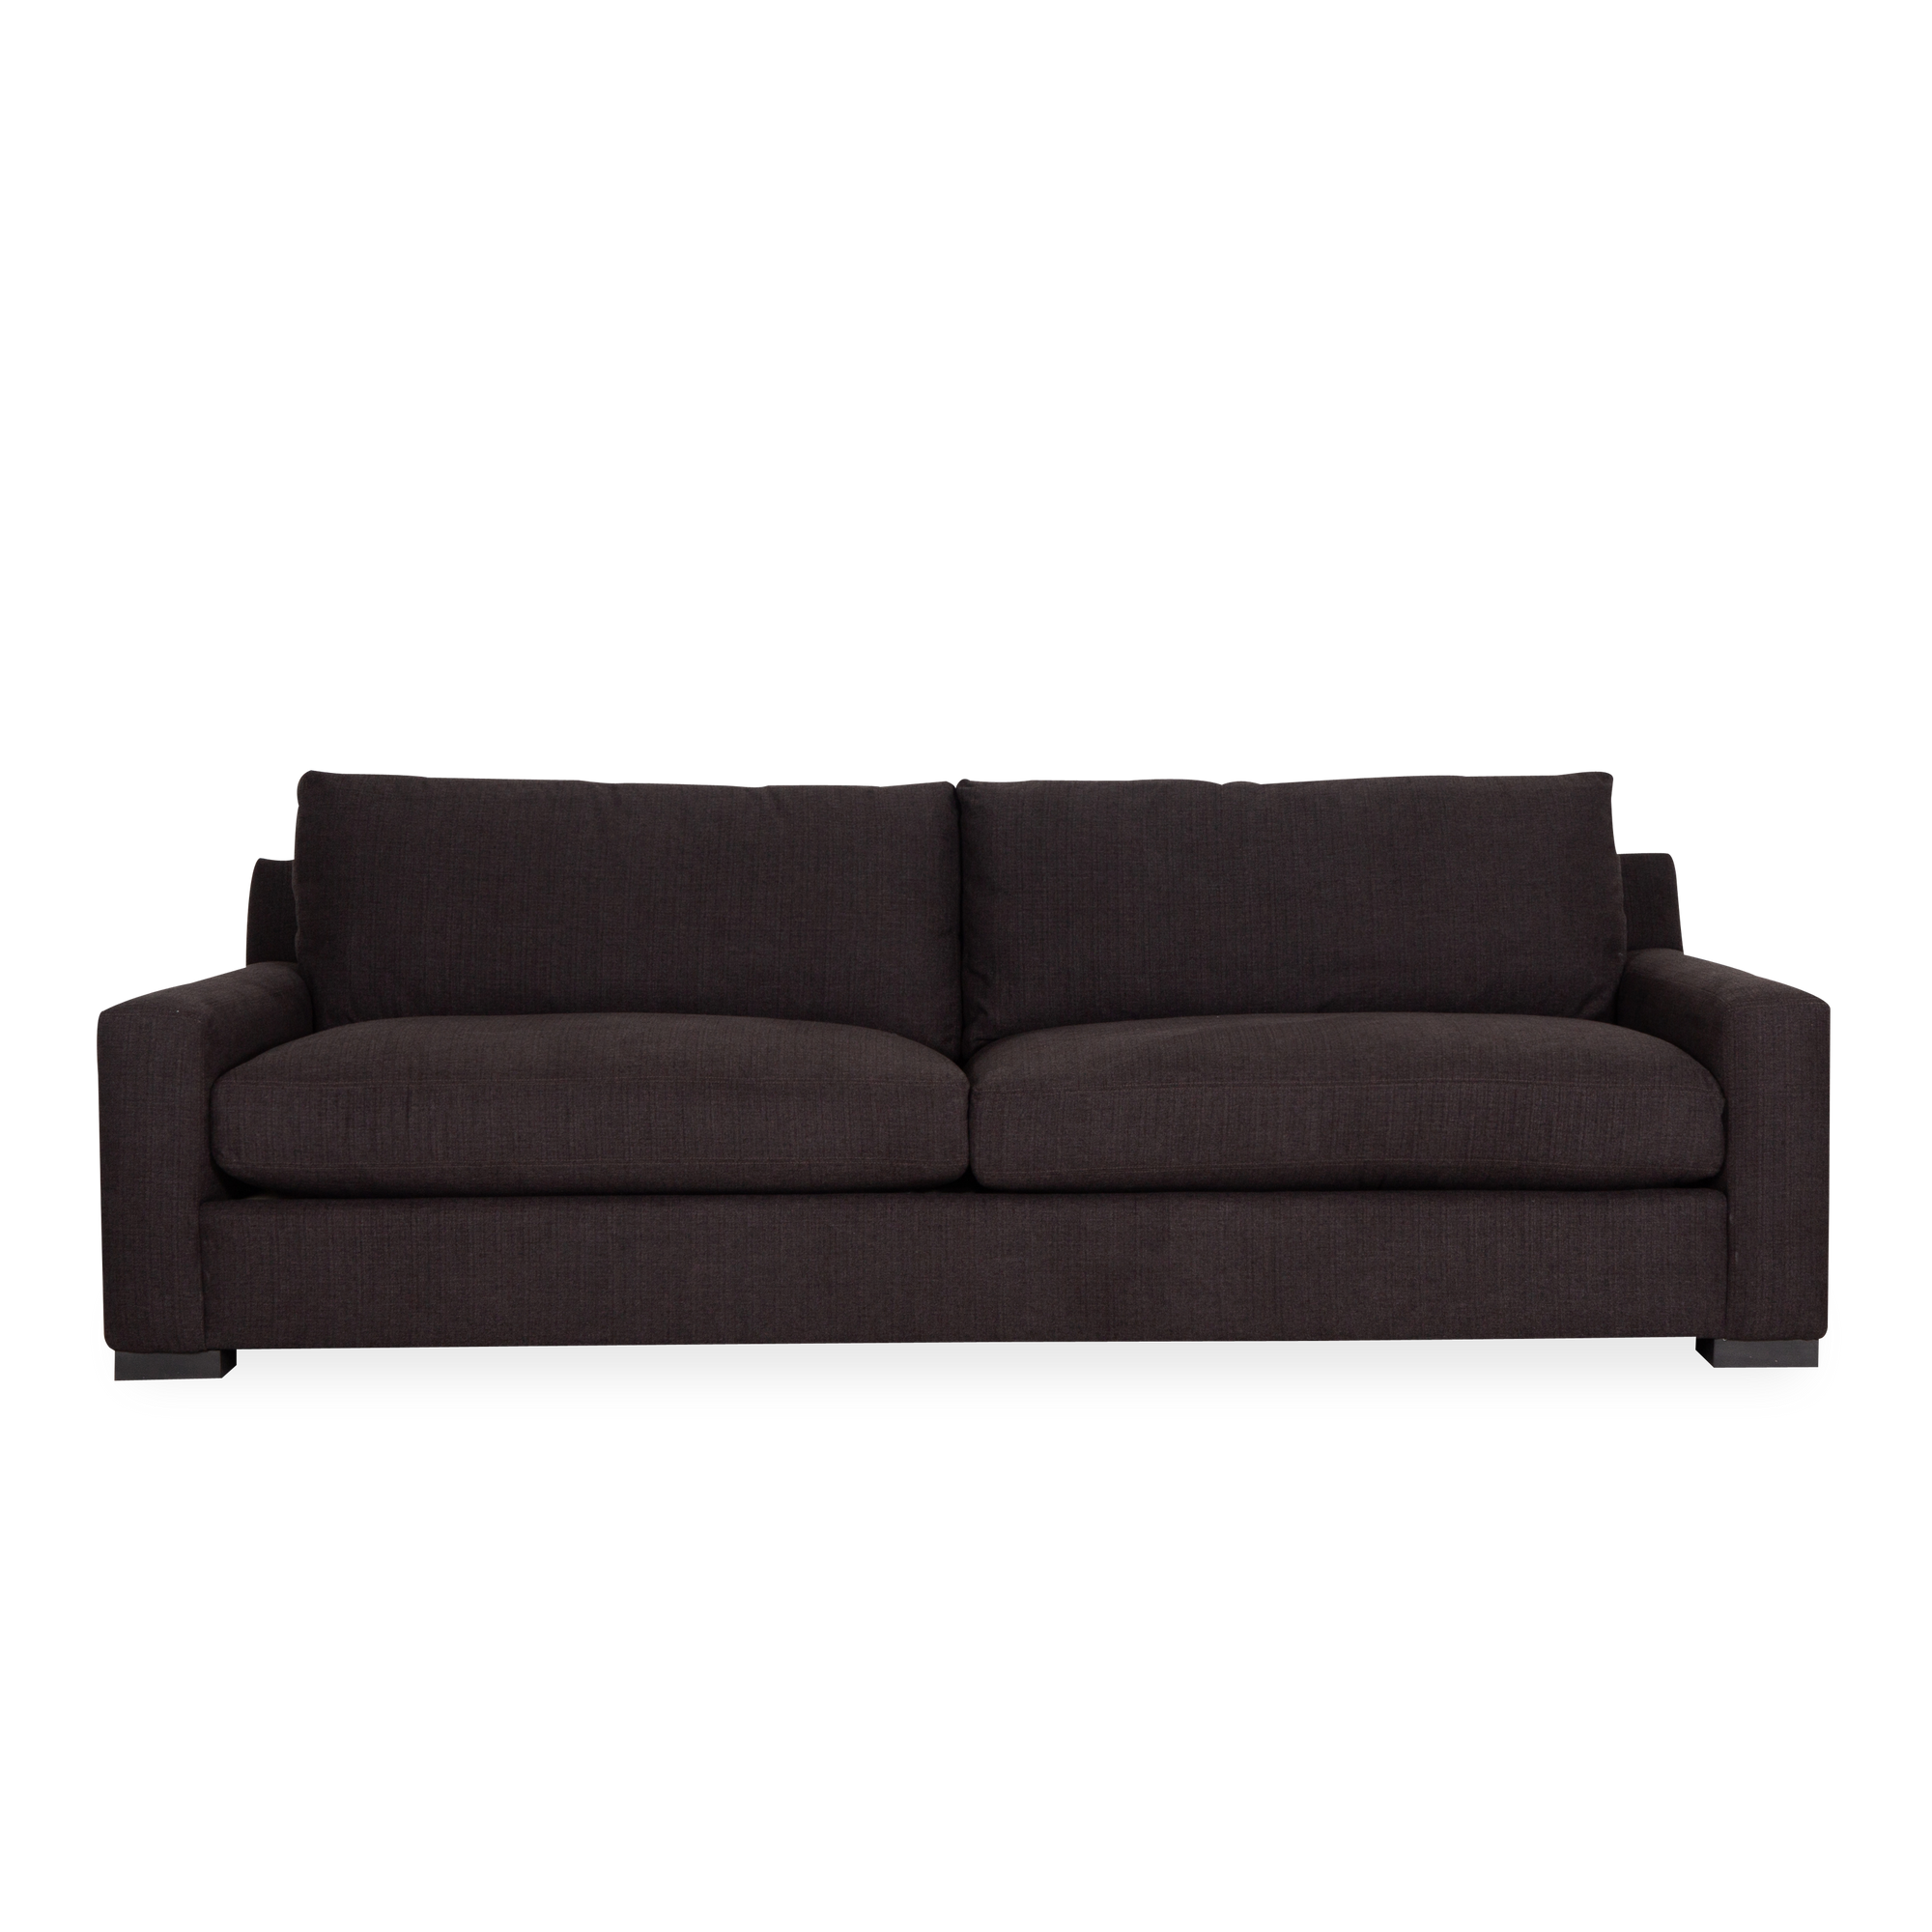 Offering unparallelled comfort, the Solana Sofa elevates classical sofa styling.